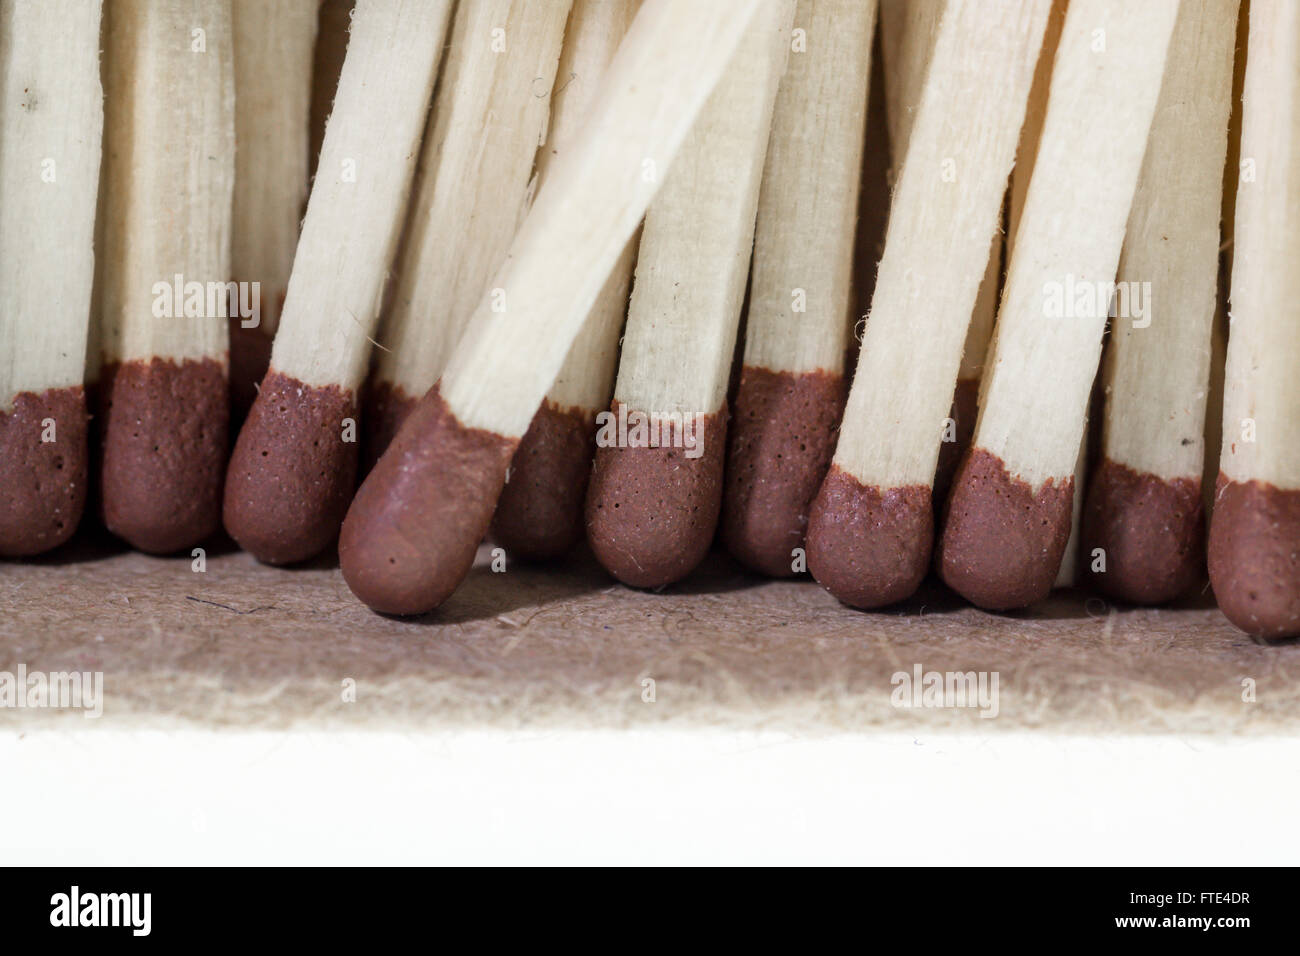 Macro close up image of common brown headed matches used for lighting gas, cigarettes, or candles. Stock Photo